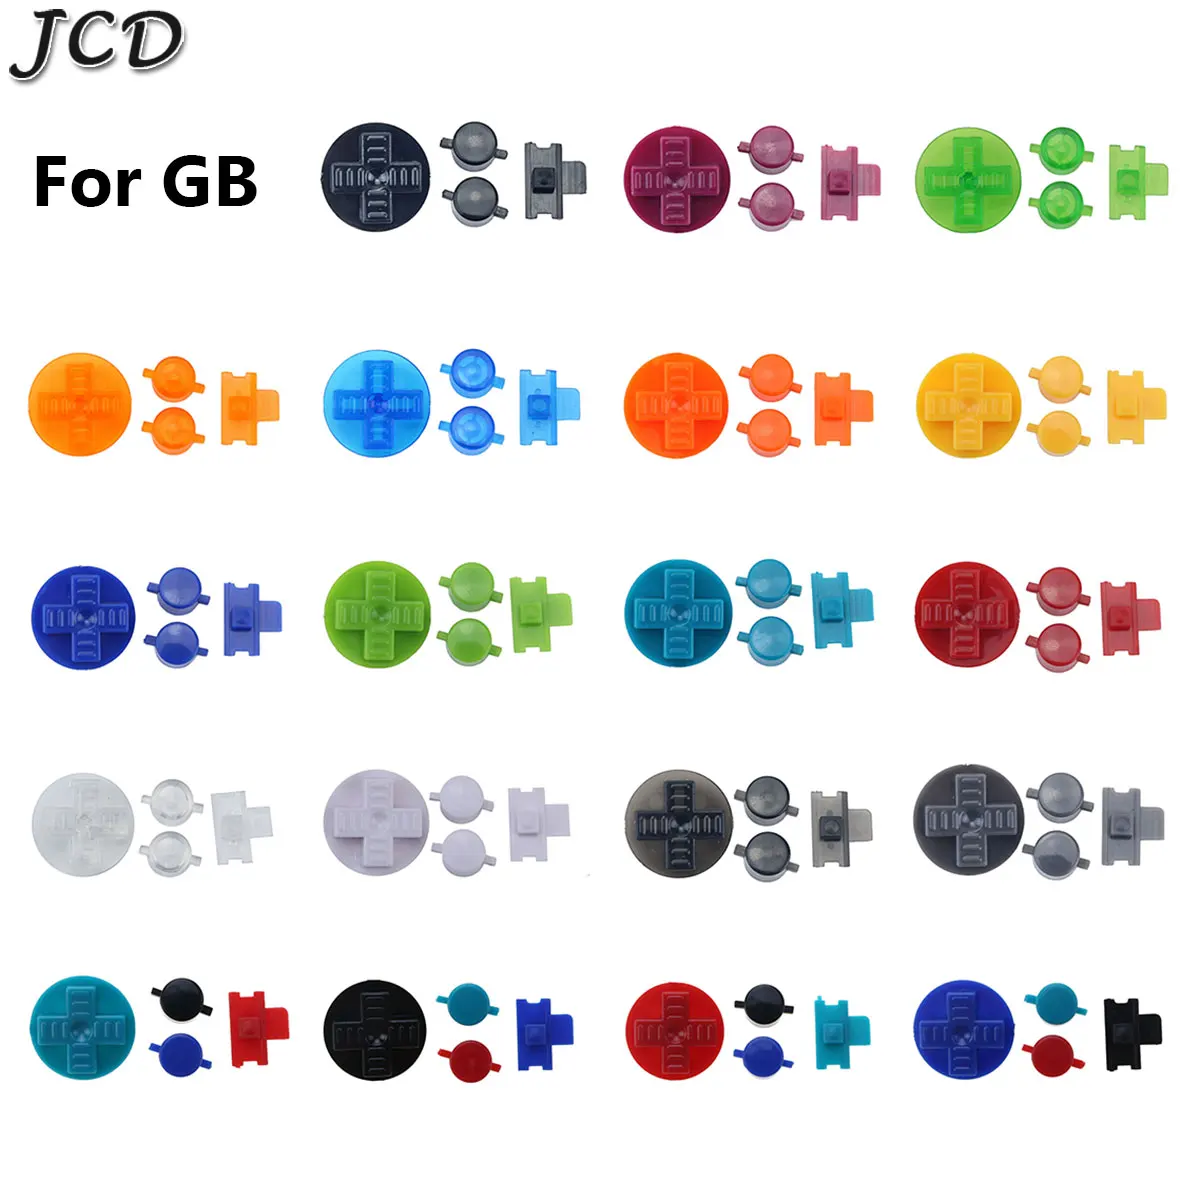 

JCD 19colors Colorful Replacement Buttons for Gameboy Classic GB Keypads for GB DMG DIY for Gameboy A B buttons D-pad